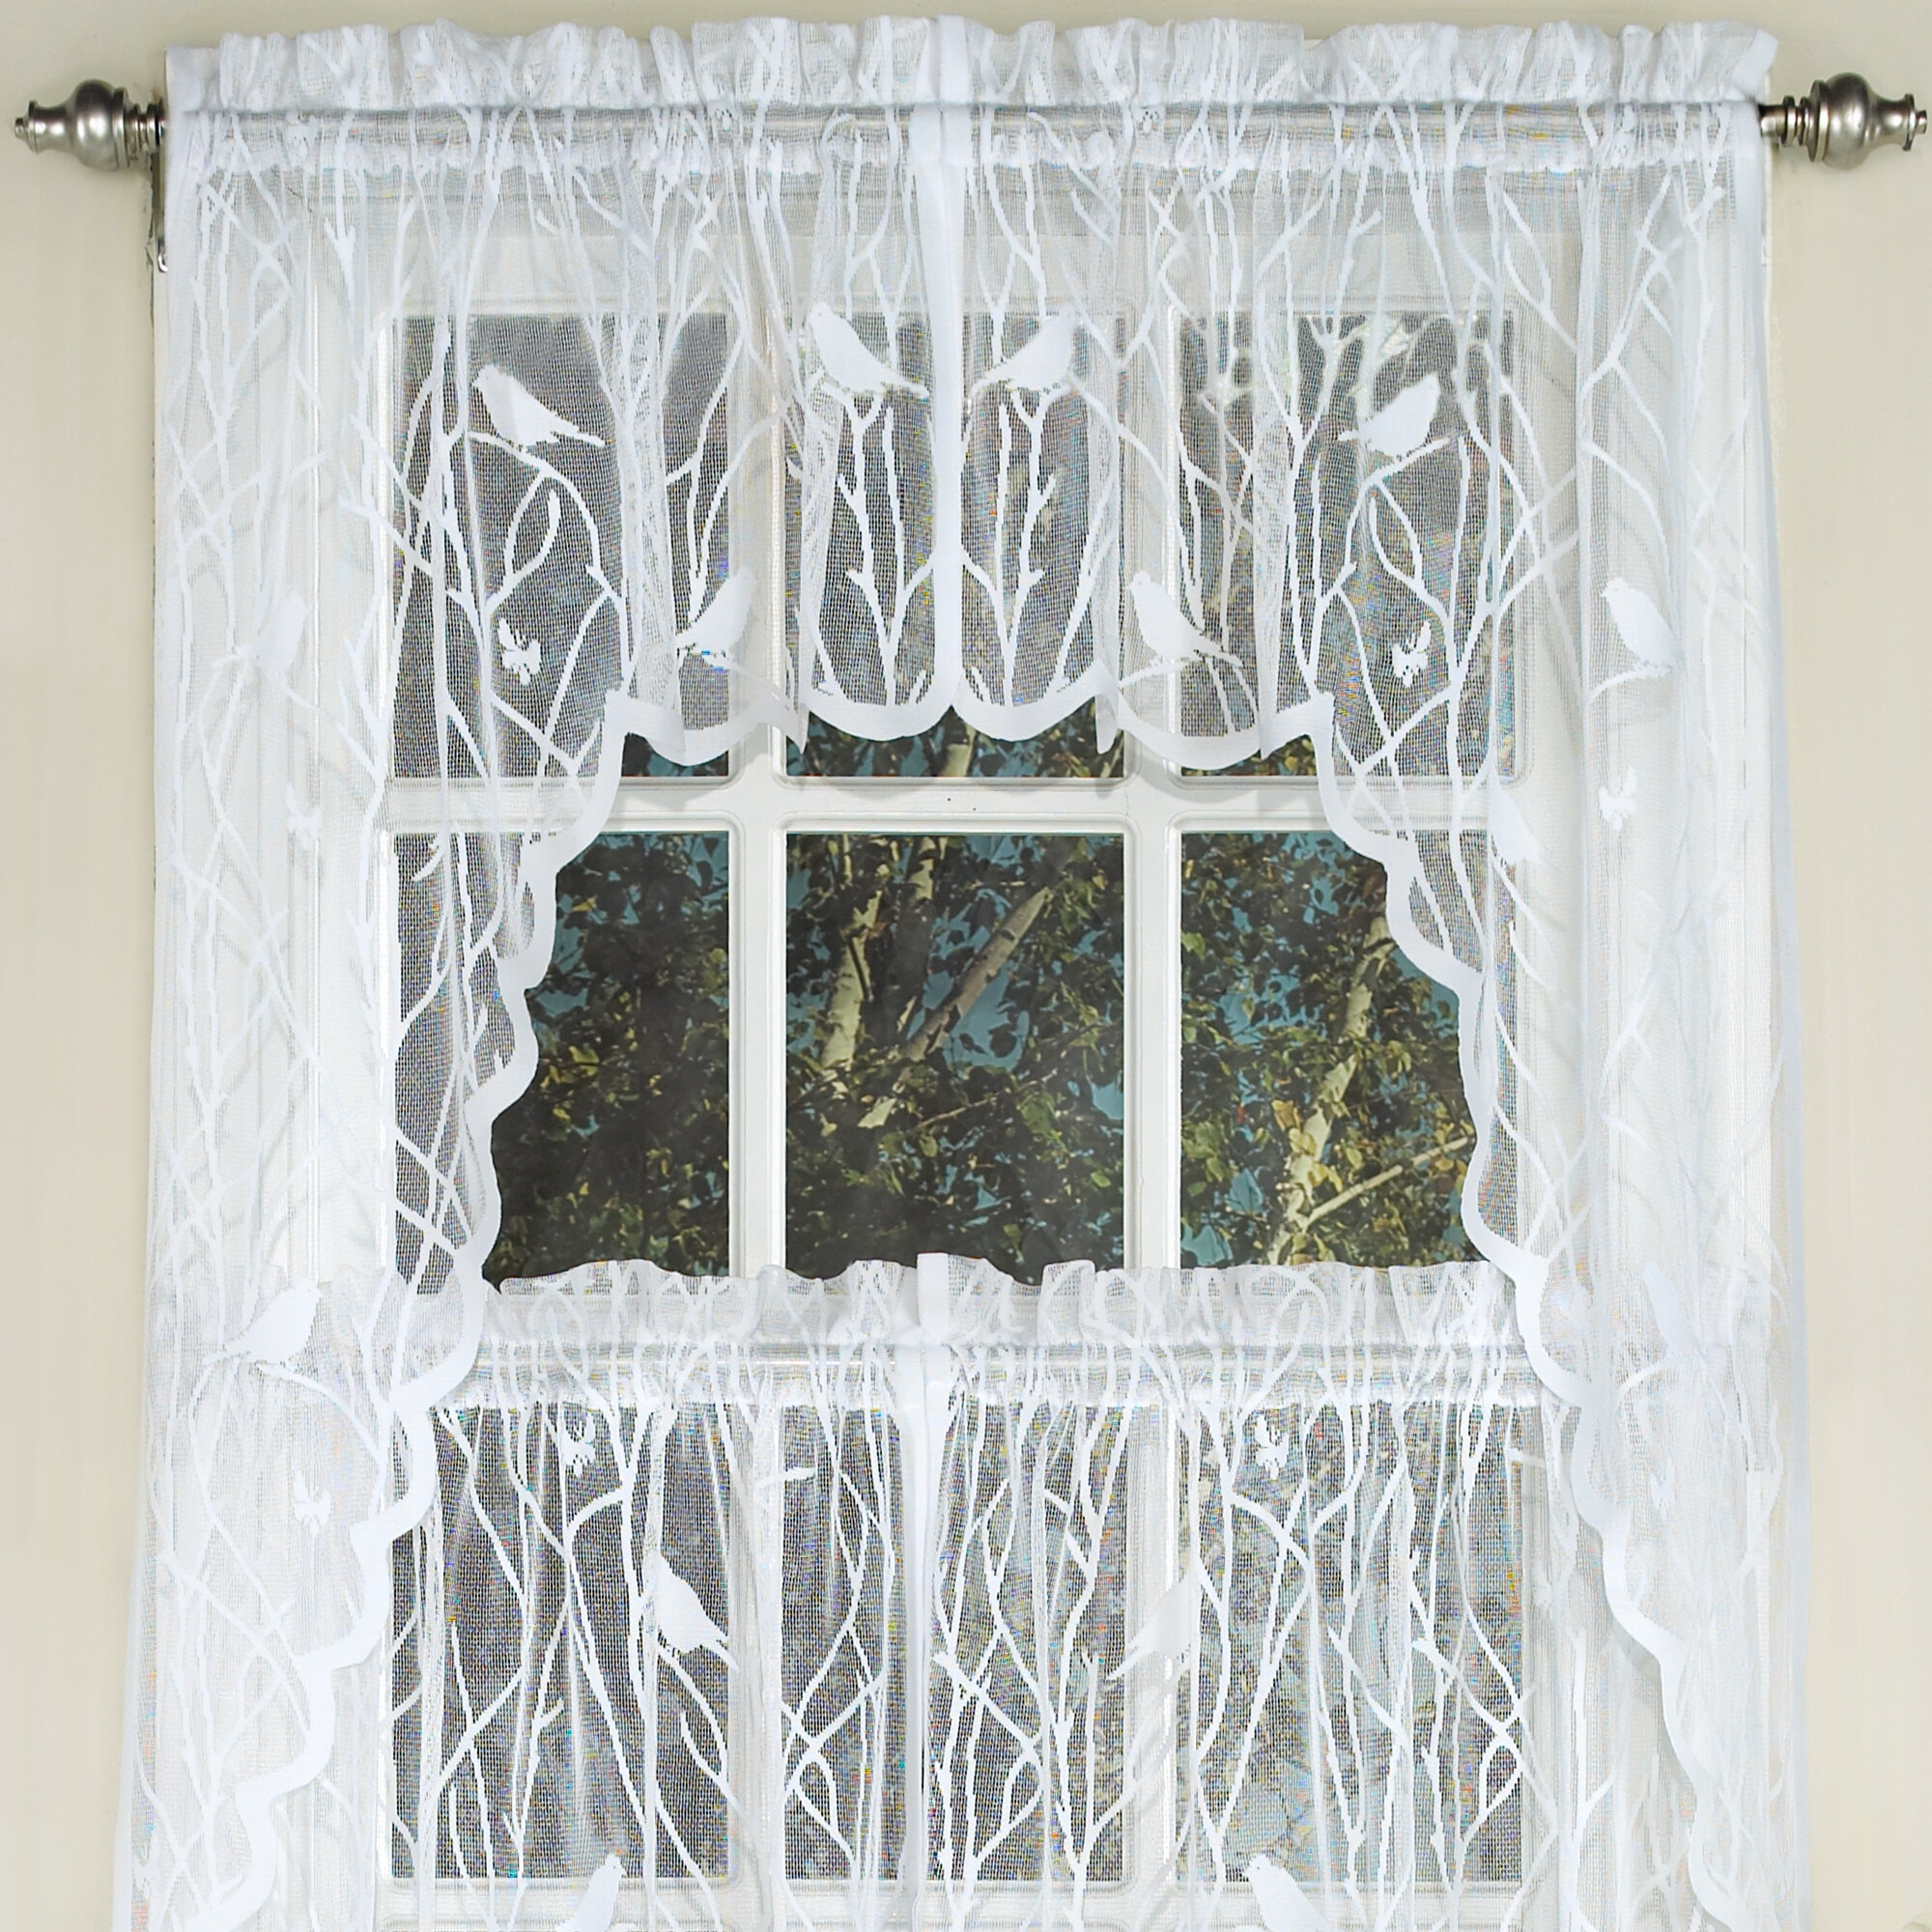 Knit Lace Song Bird Motif Kitchen Curtains 